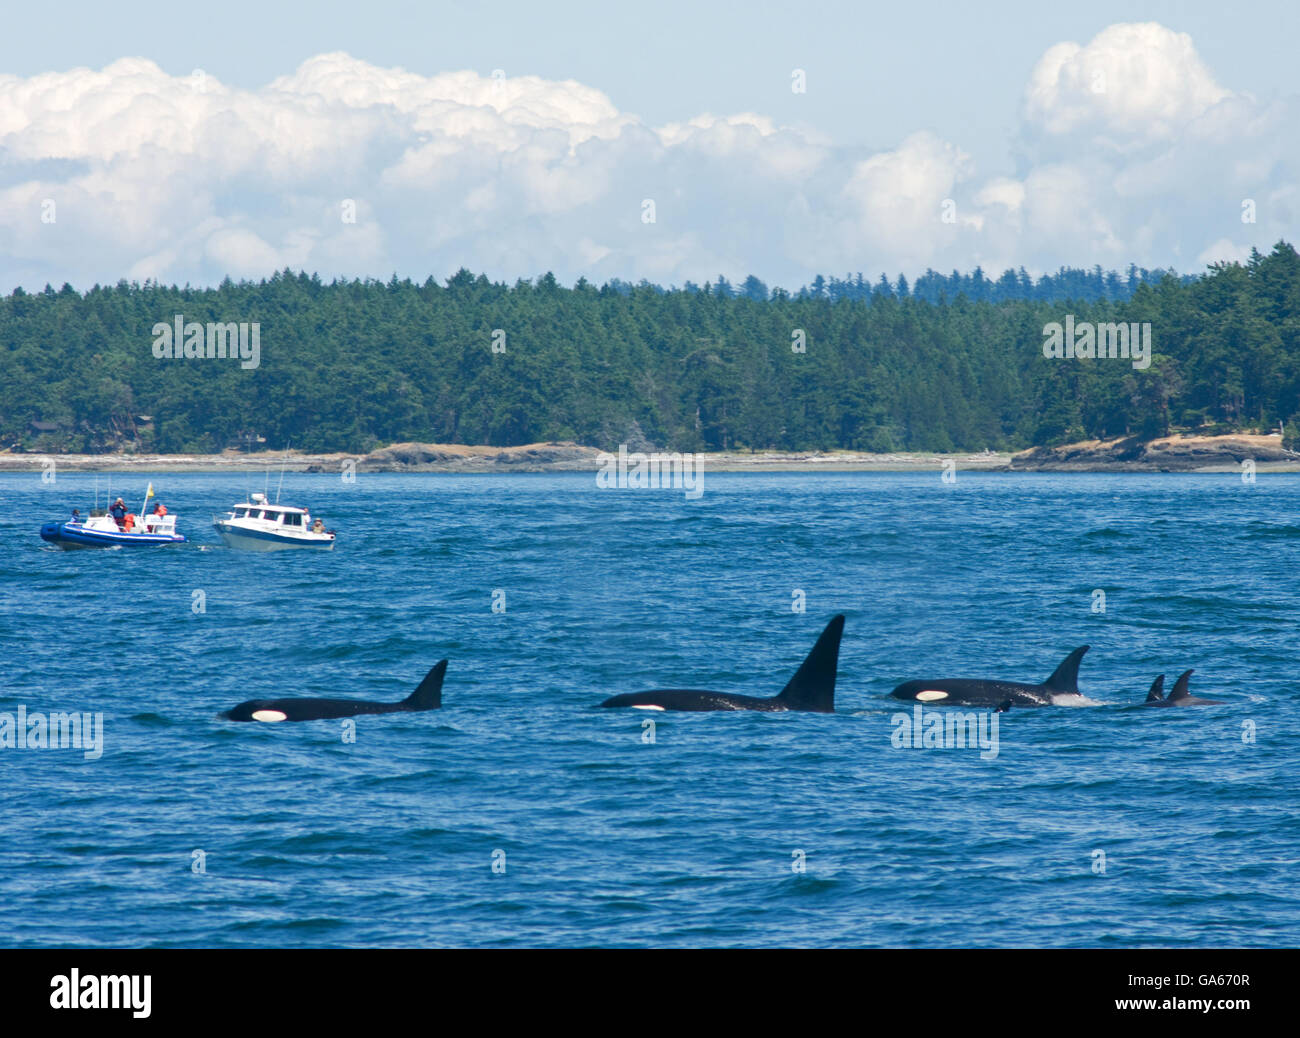 A group of Killer Whales swim in Samish Bay, north of Anecortes, Washington State, in the Pacific Northwestern USA. Stock Photo